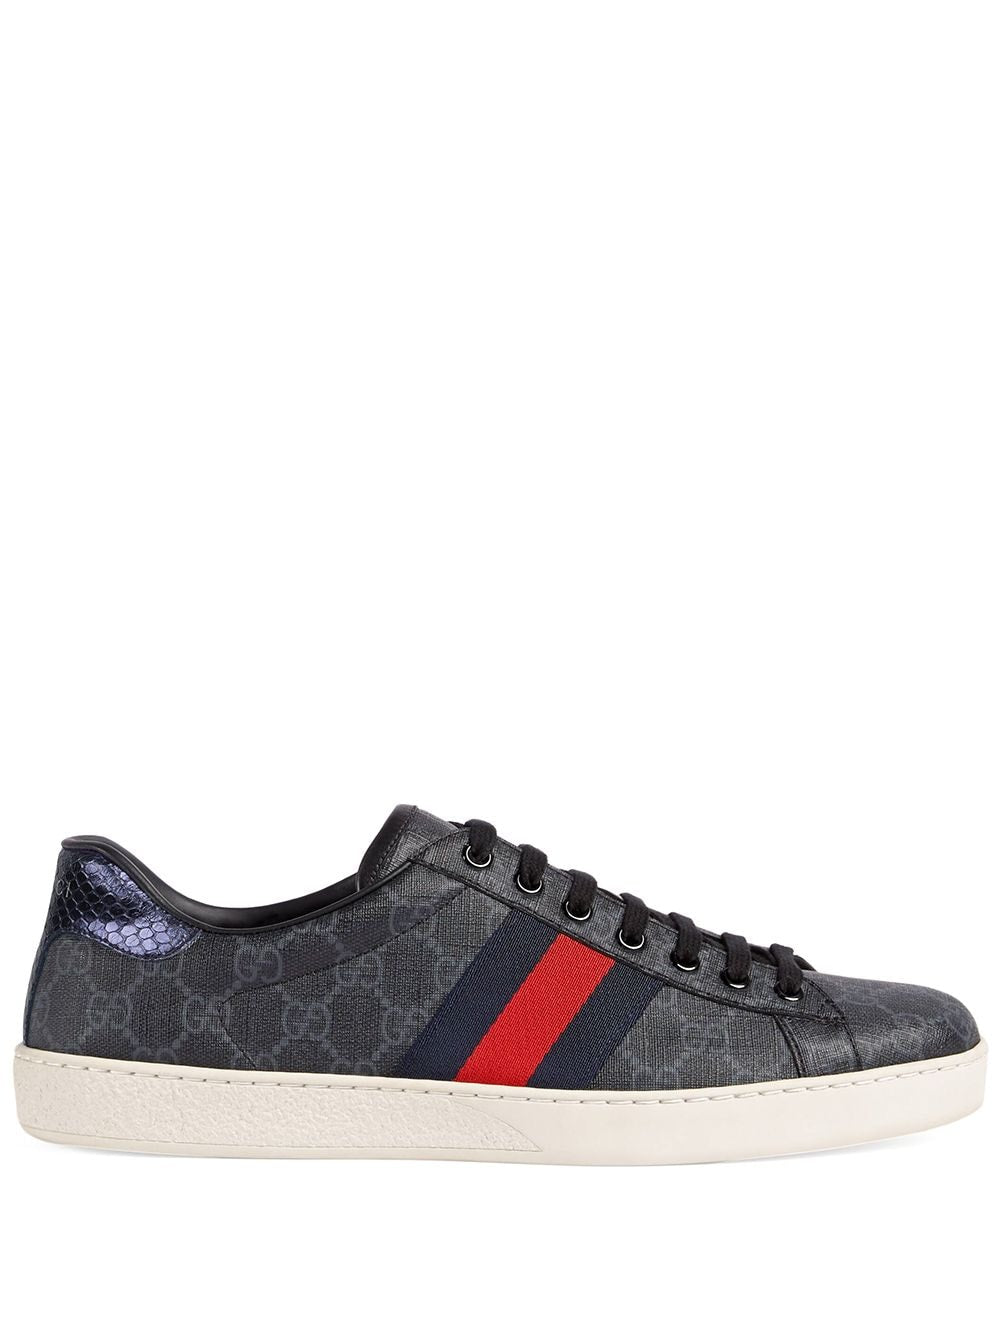 GUCCI Classic Black Canvas Men's Sneakers - Perfect for Any Occasion